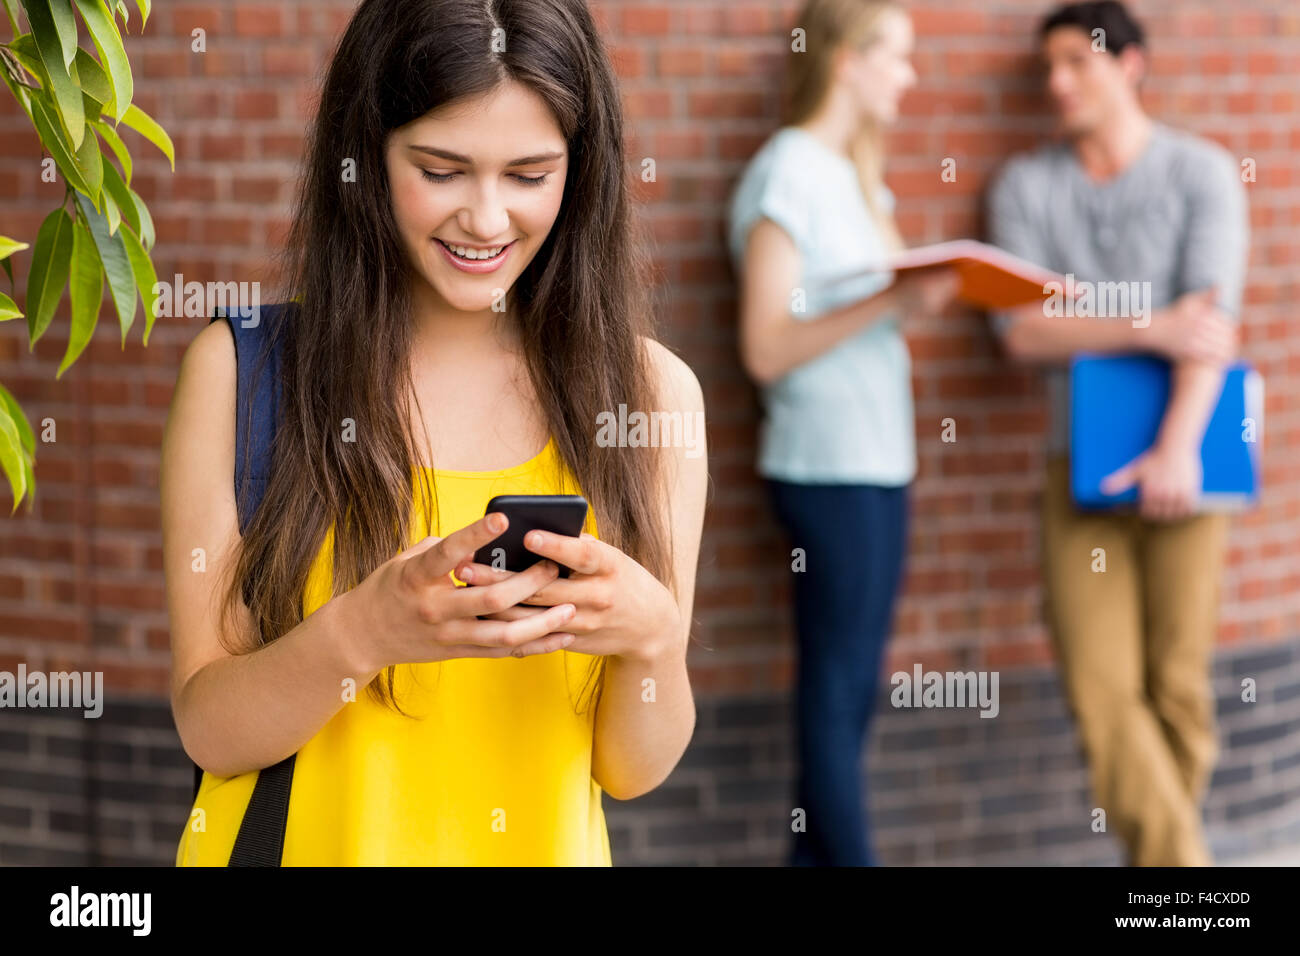 Student sending a text message Stock Photo